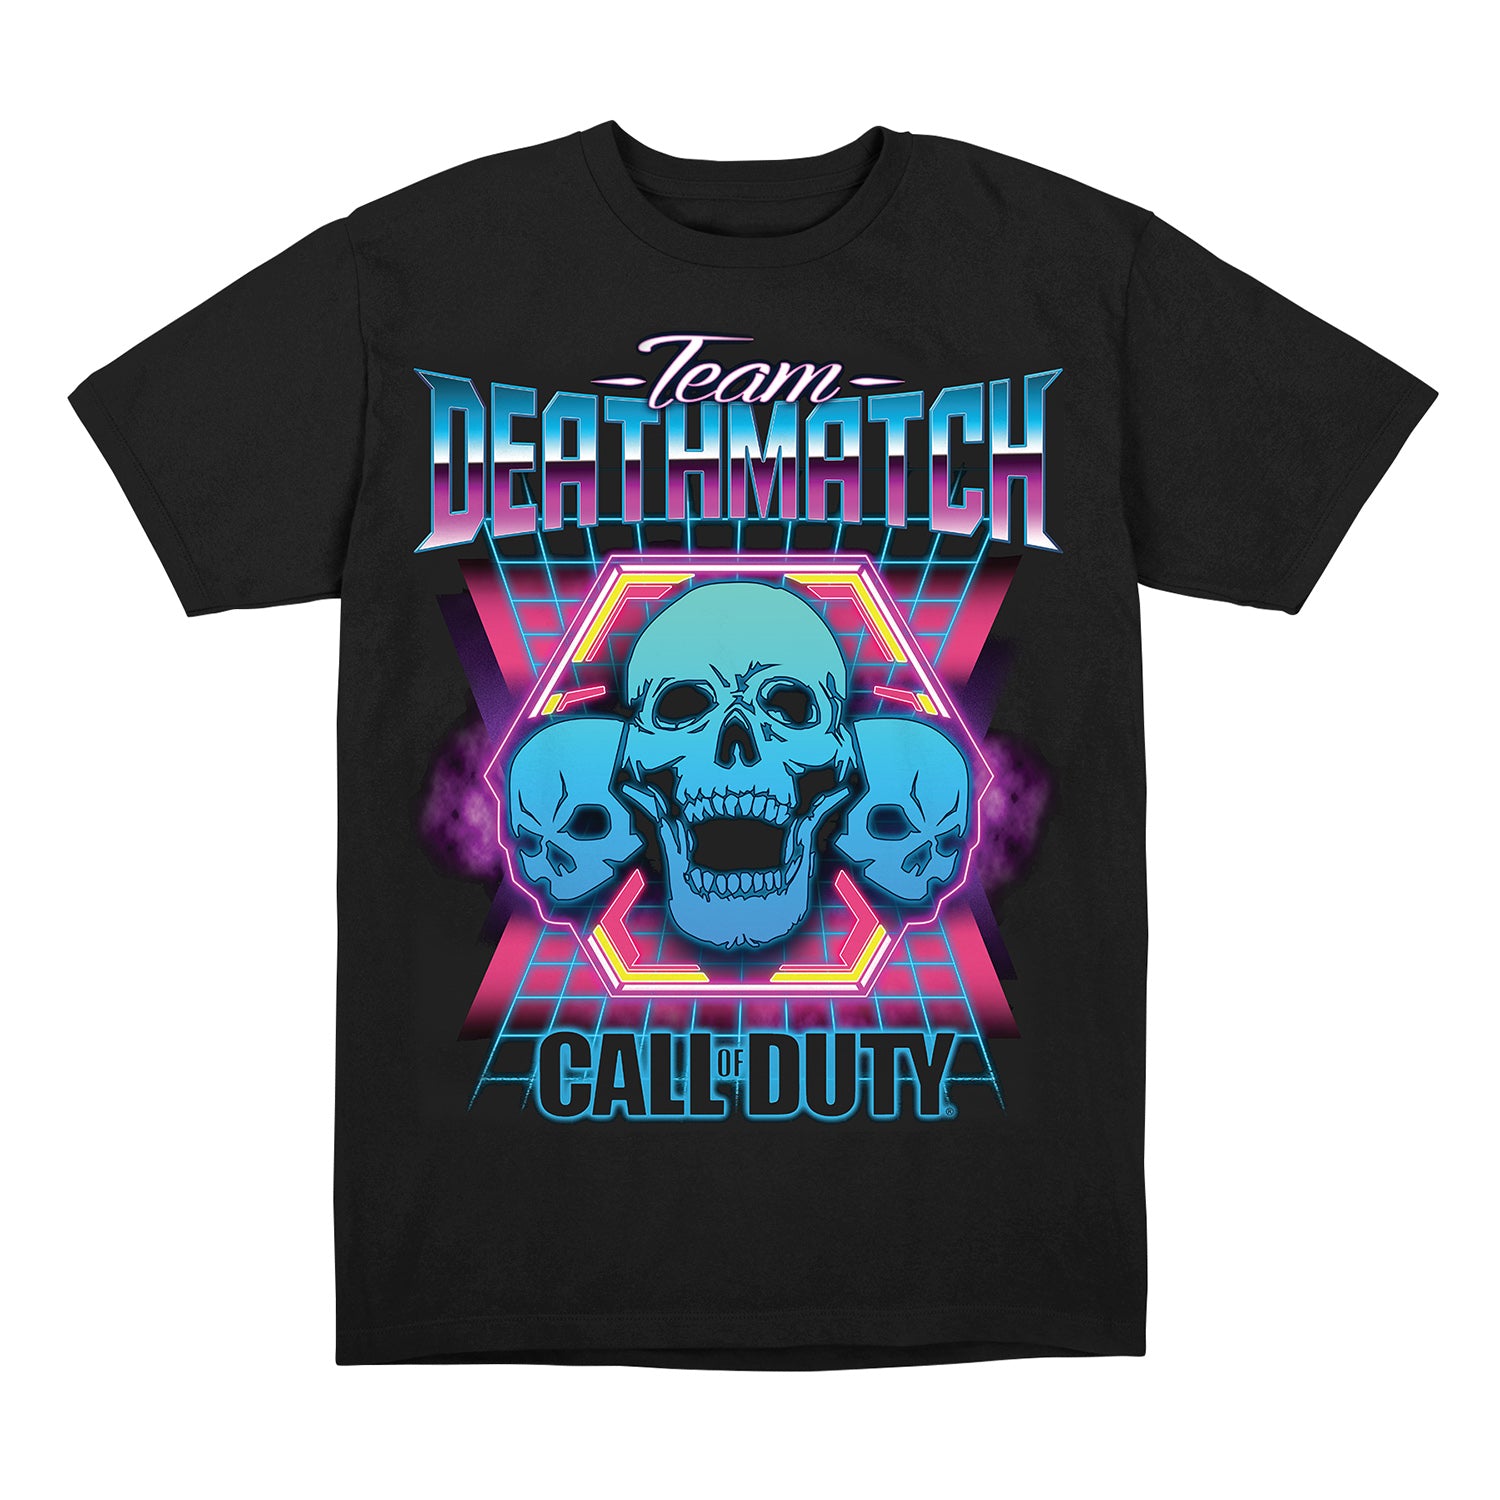 Call of Duty Black Team Deathmatch Arcade T-Shirt - Front View